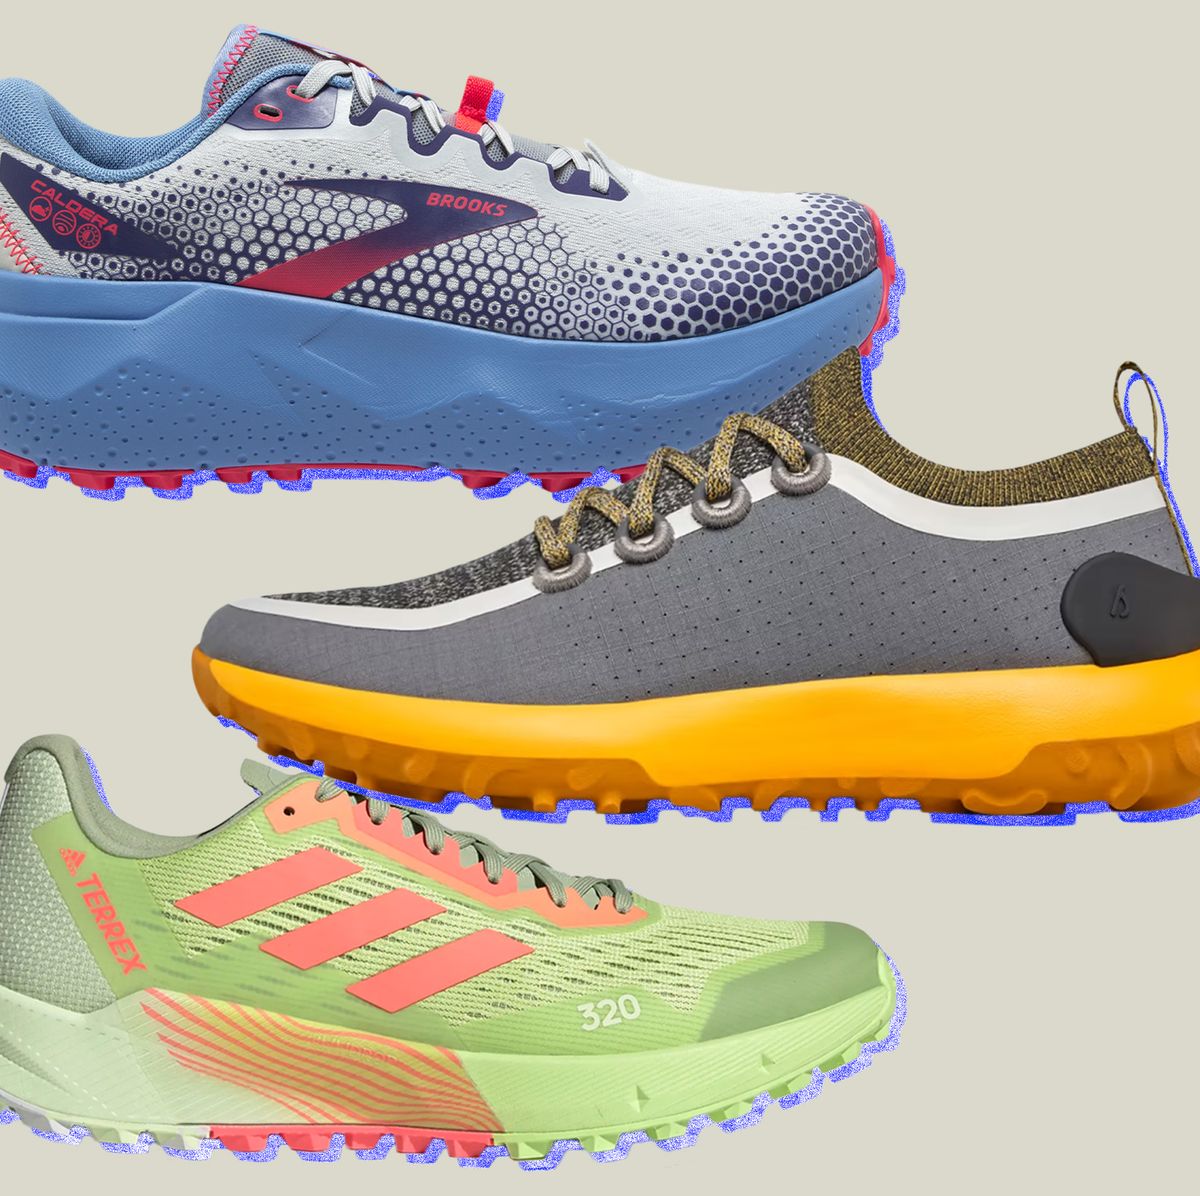 The 14 Best Trail Running Shoes for Off-Road Running